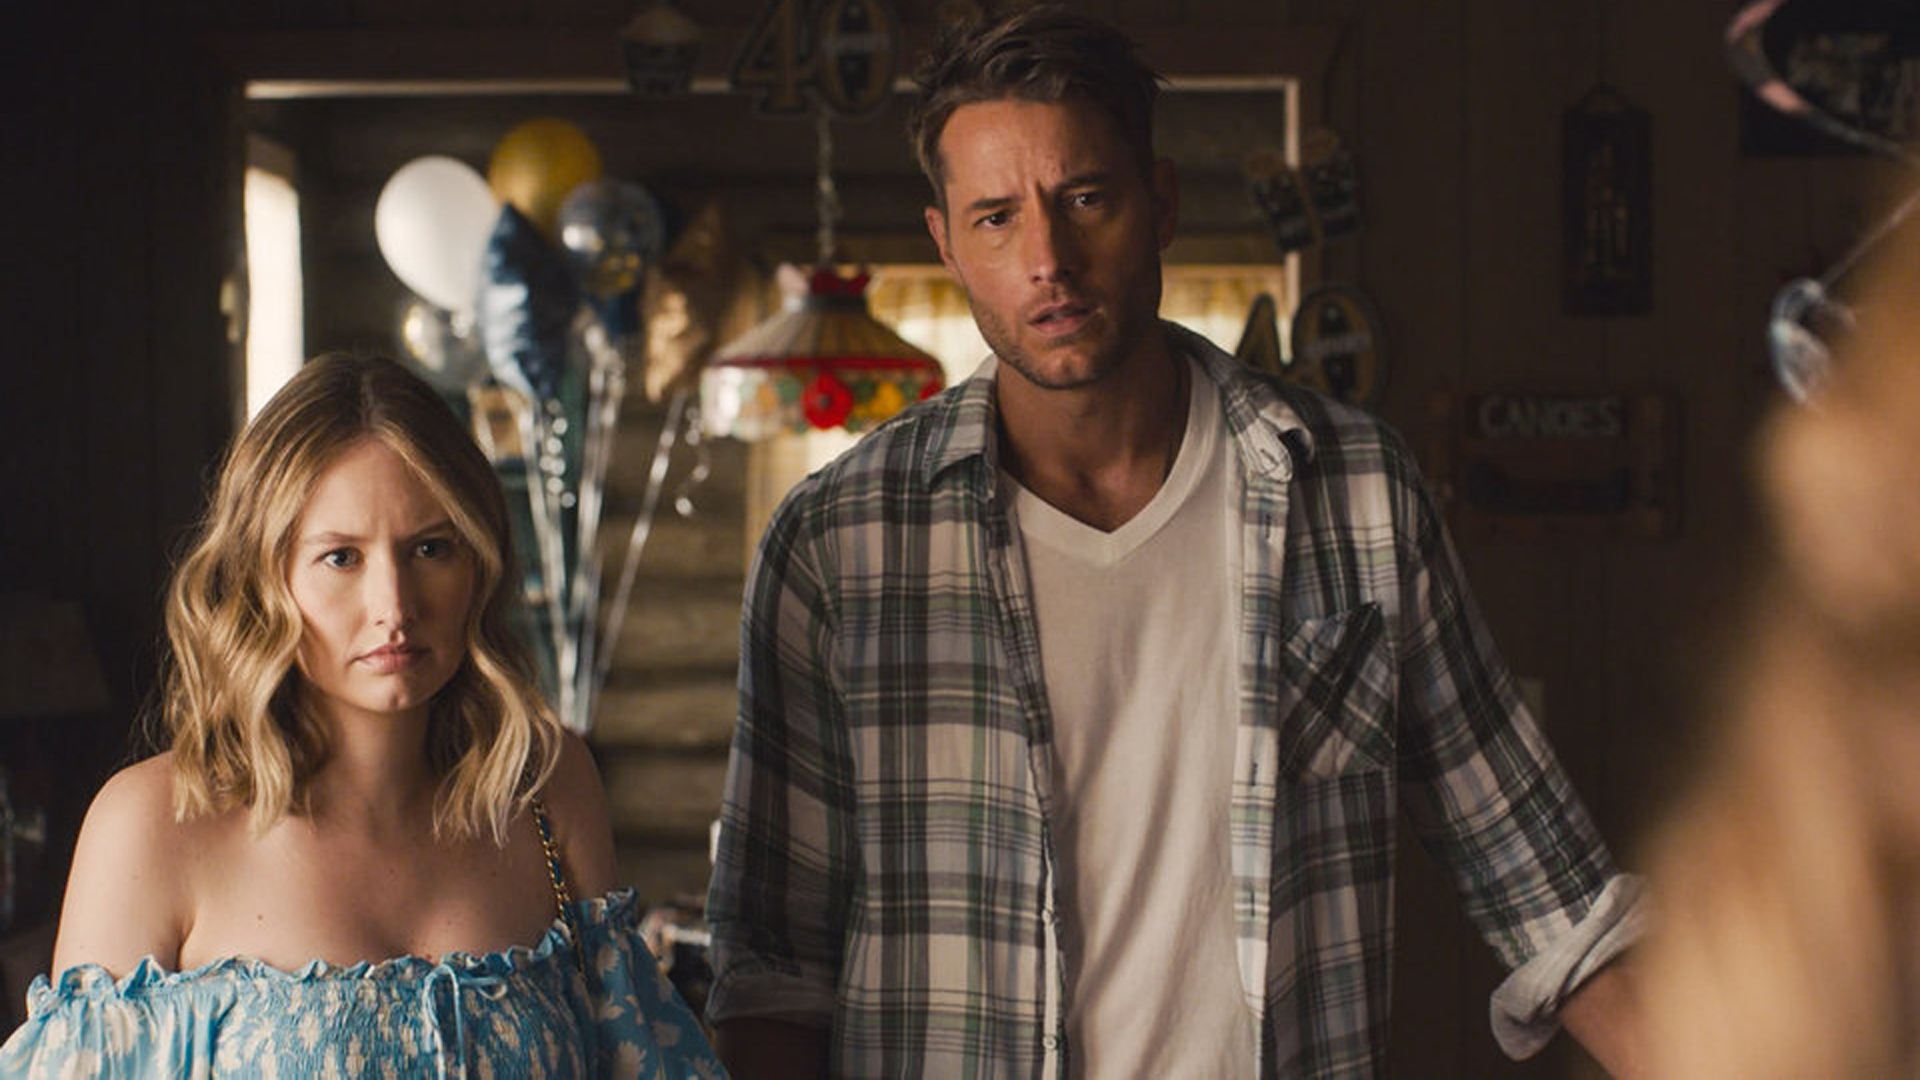 Caitlin Thompson as Madison, Justin Hartley as Kevin on 'This Is Us' Season 5 premiere 2020